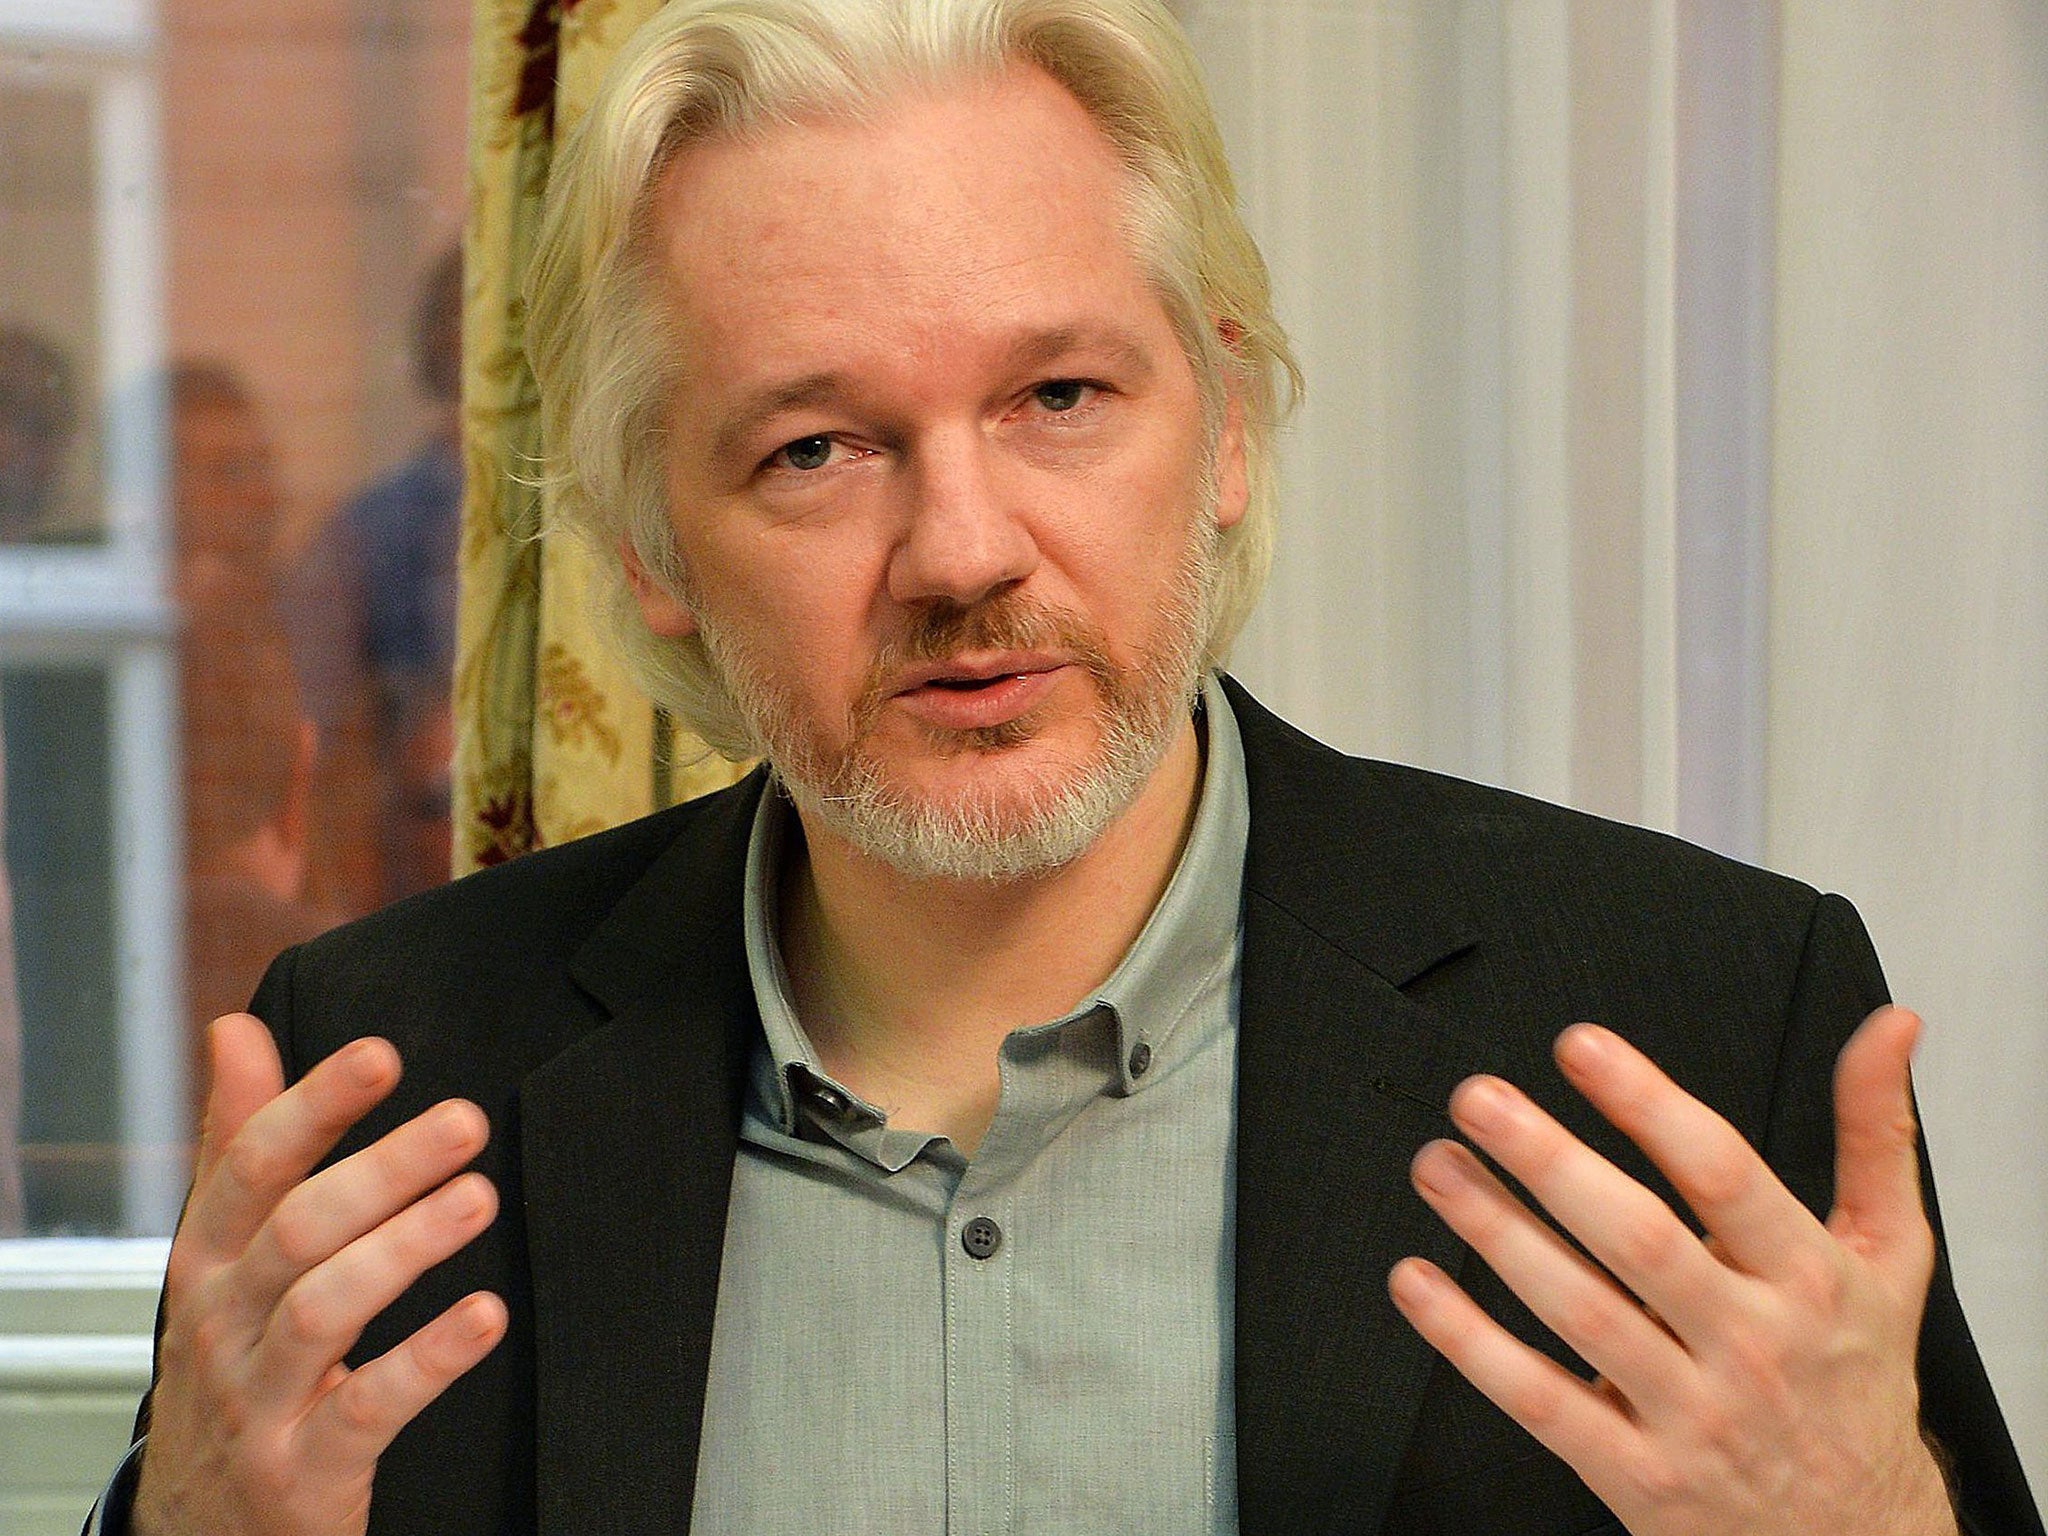 The WikiLeaks founder says he has not been outside for three years